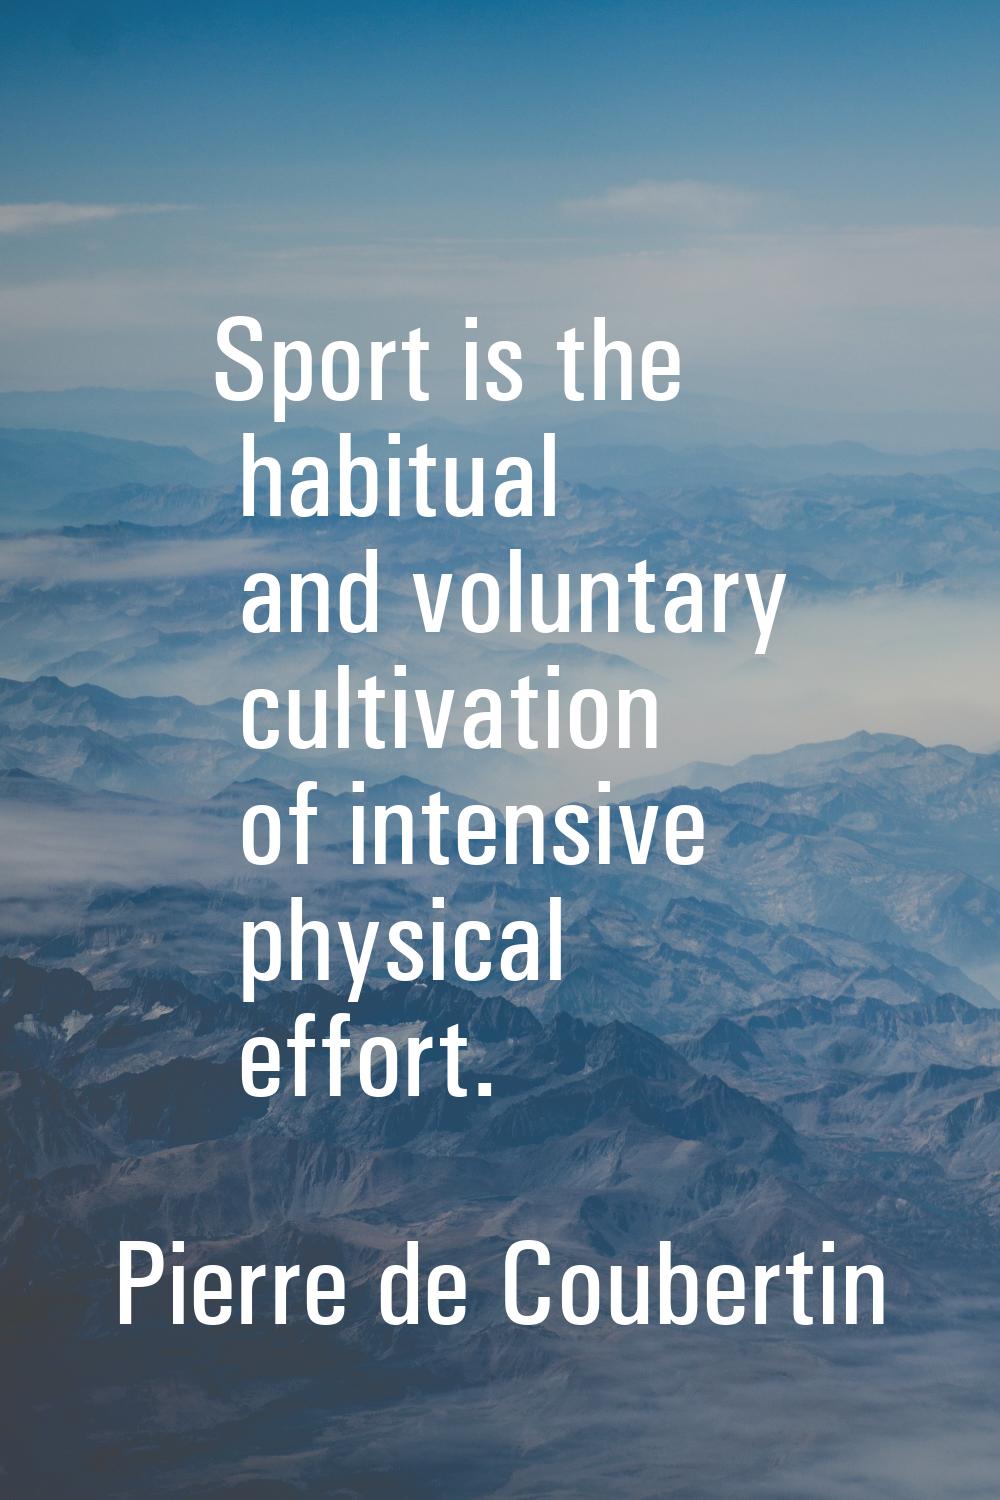 Sport is the habitual and voluntary cultivation of intensive physical effort.